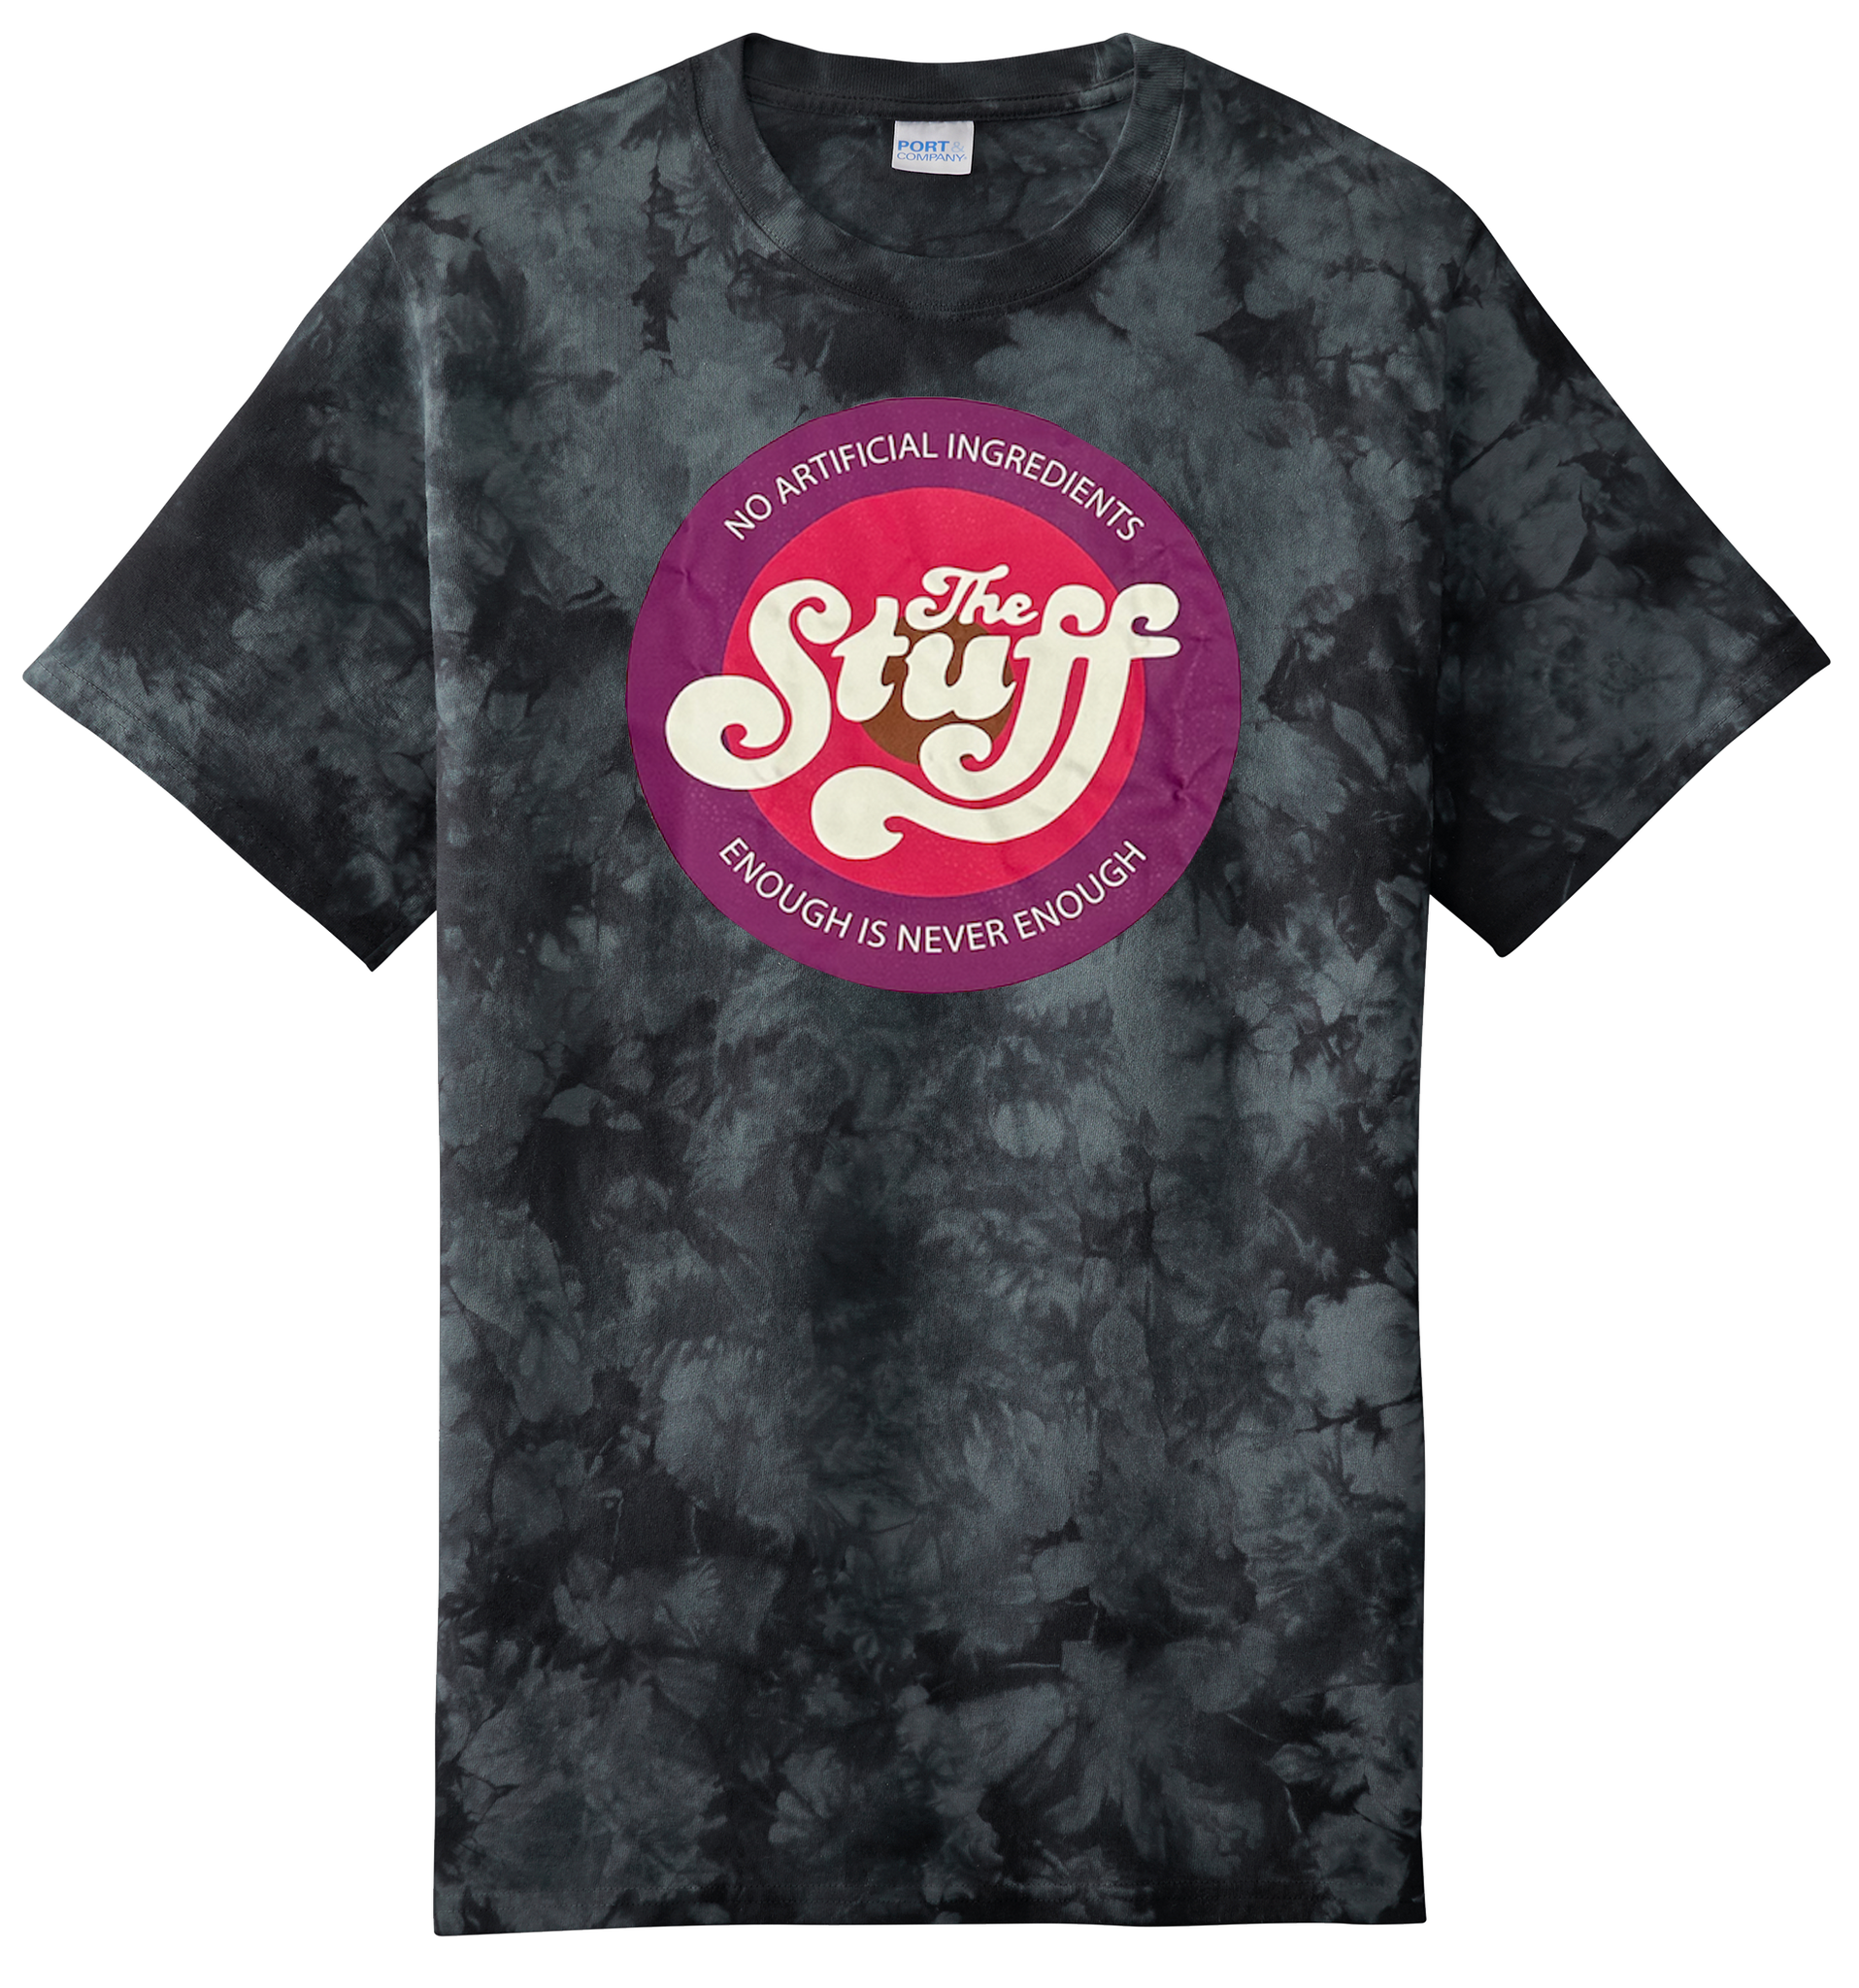 THE STUFF "LOGO" TIE DIE T-SHIRT AND STUFF CONTAINER - LIMITED TO 50 EACH COLORWAY